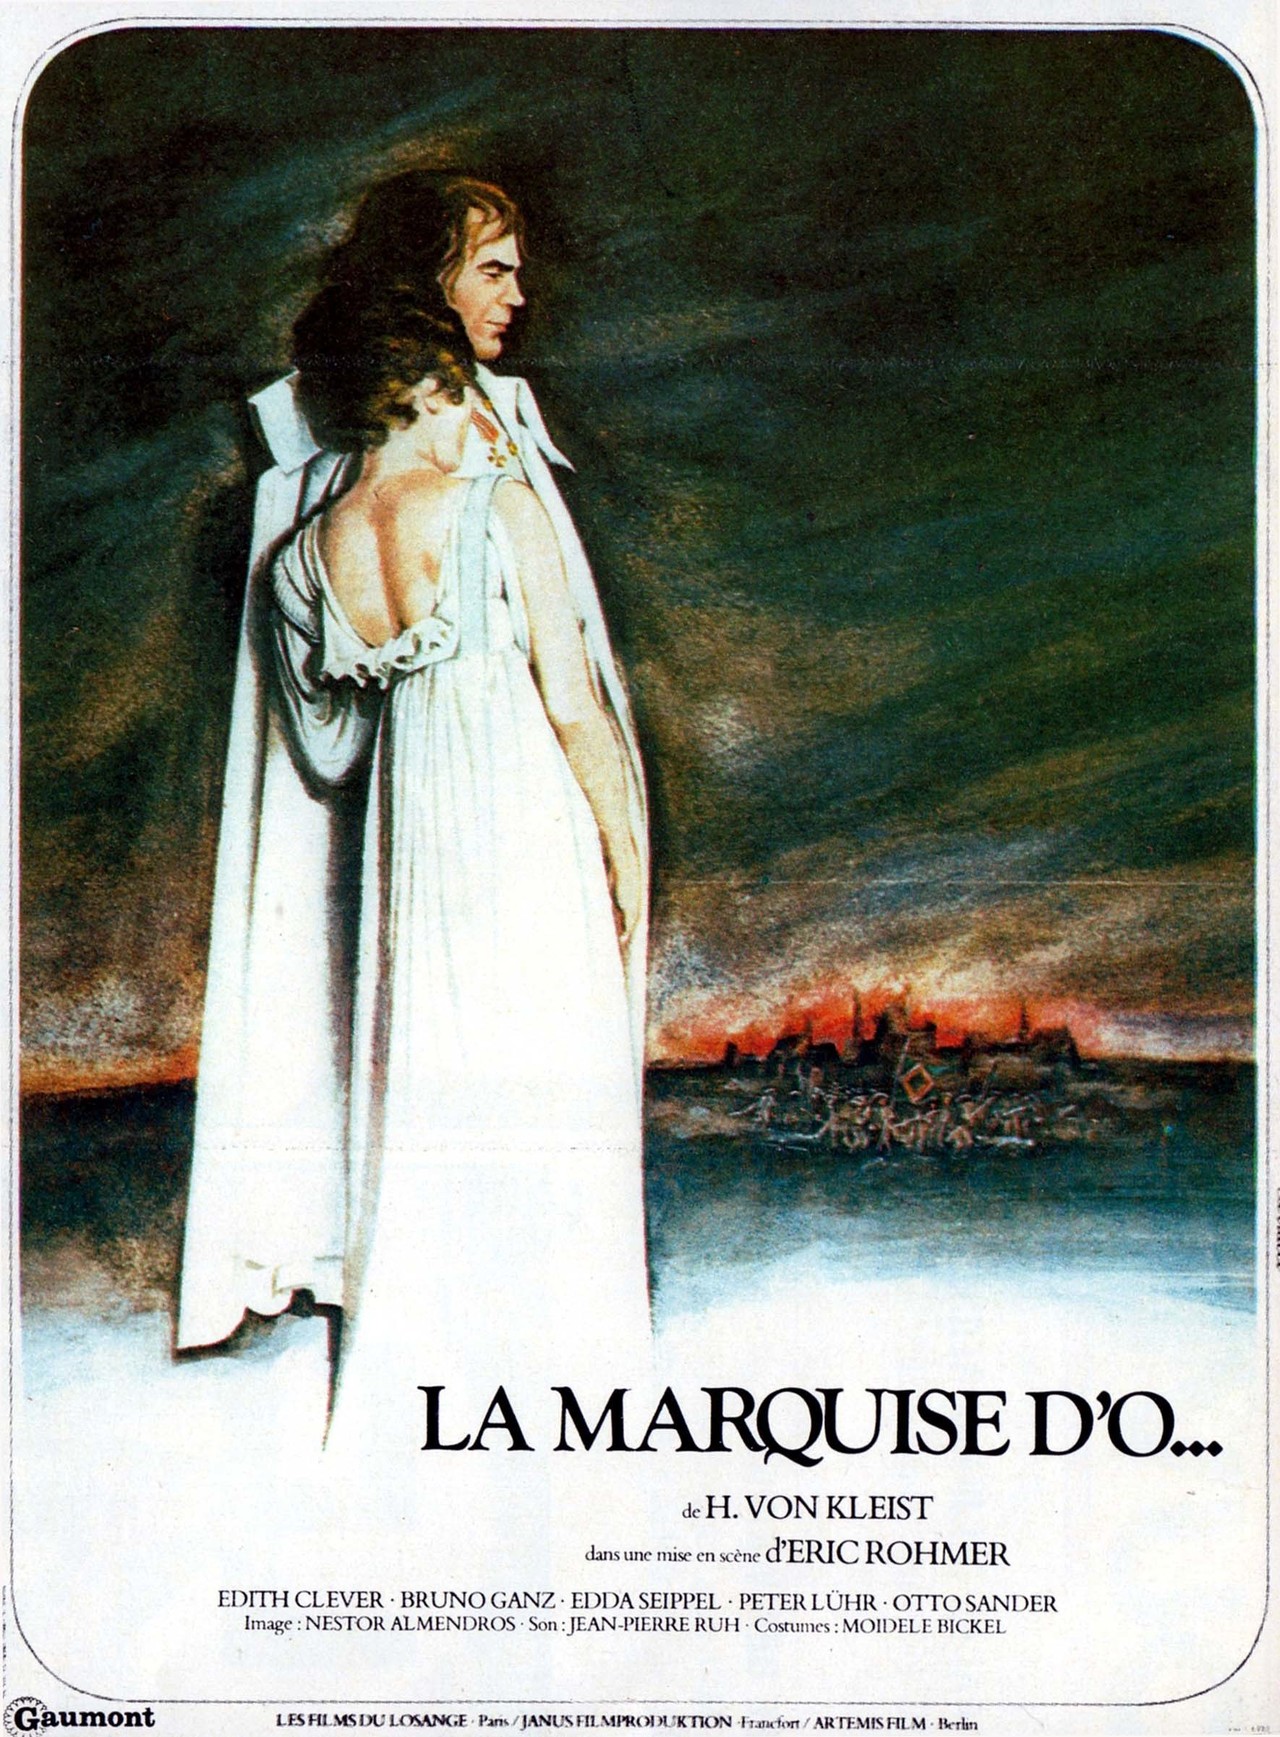 La Marquise d’O (The Marquise of O) – French Film Festival